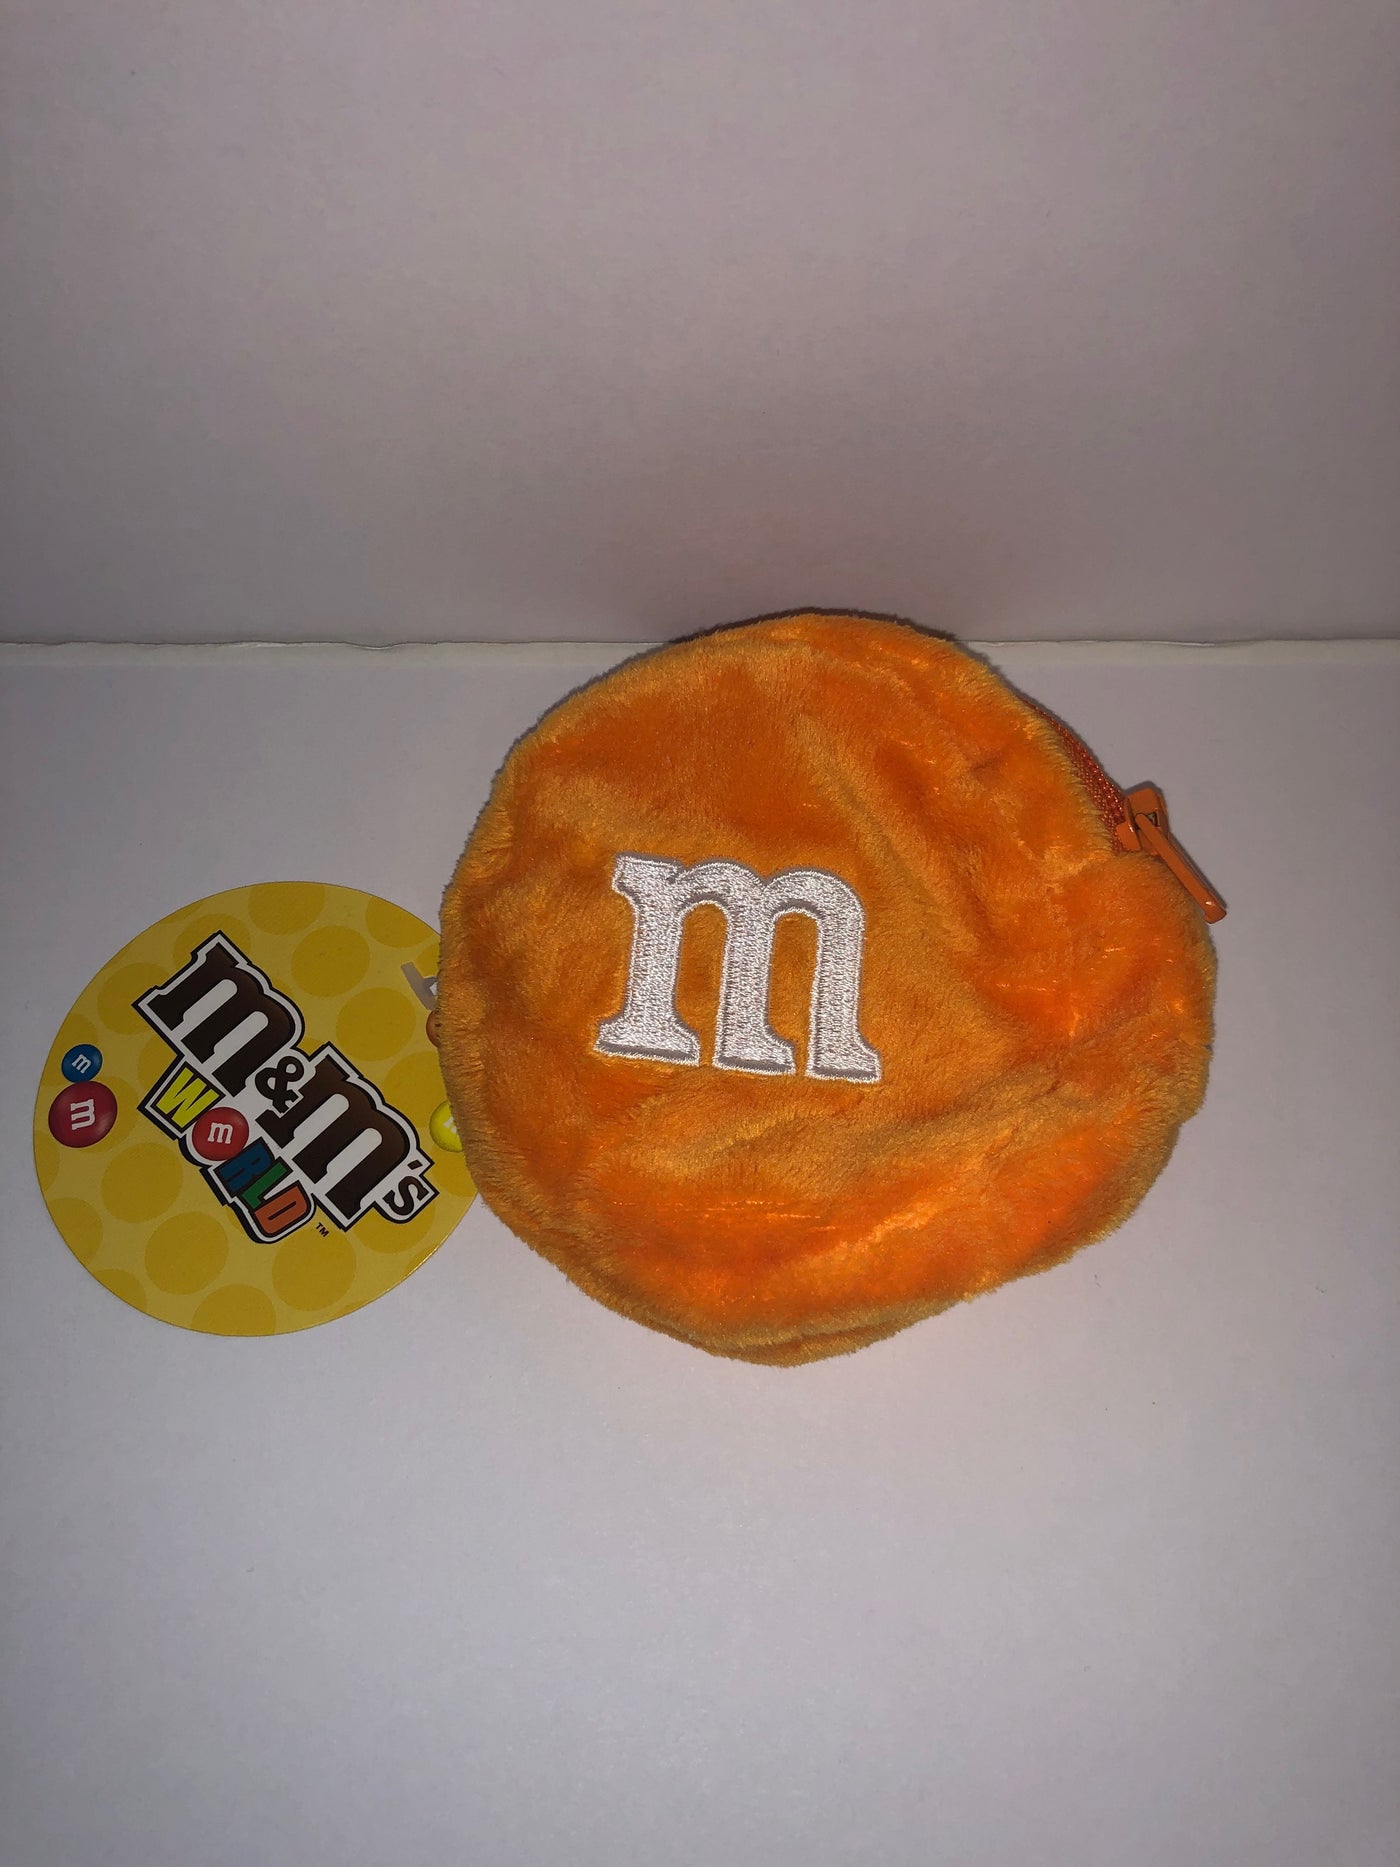 M&M's World Orange Character Coin Purse Plush New with Tags